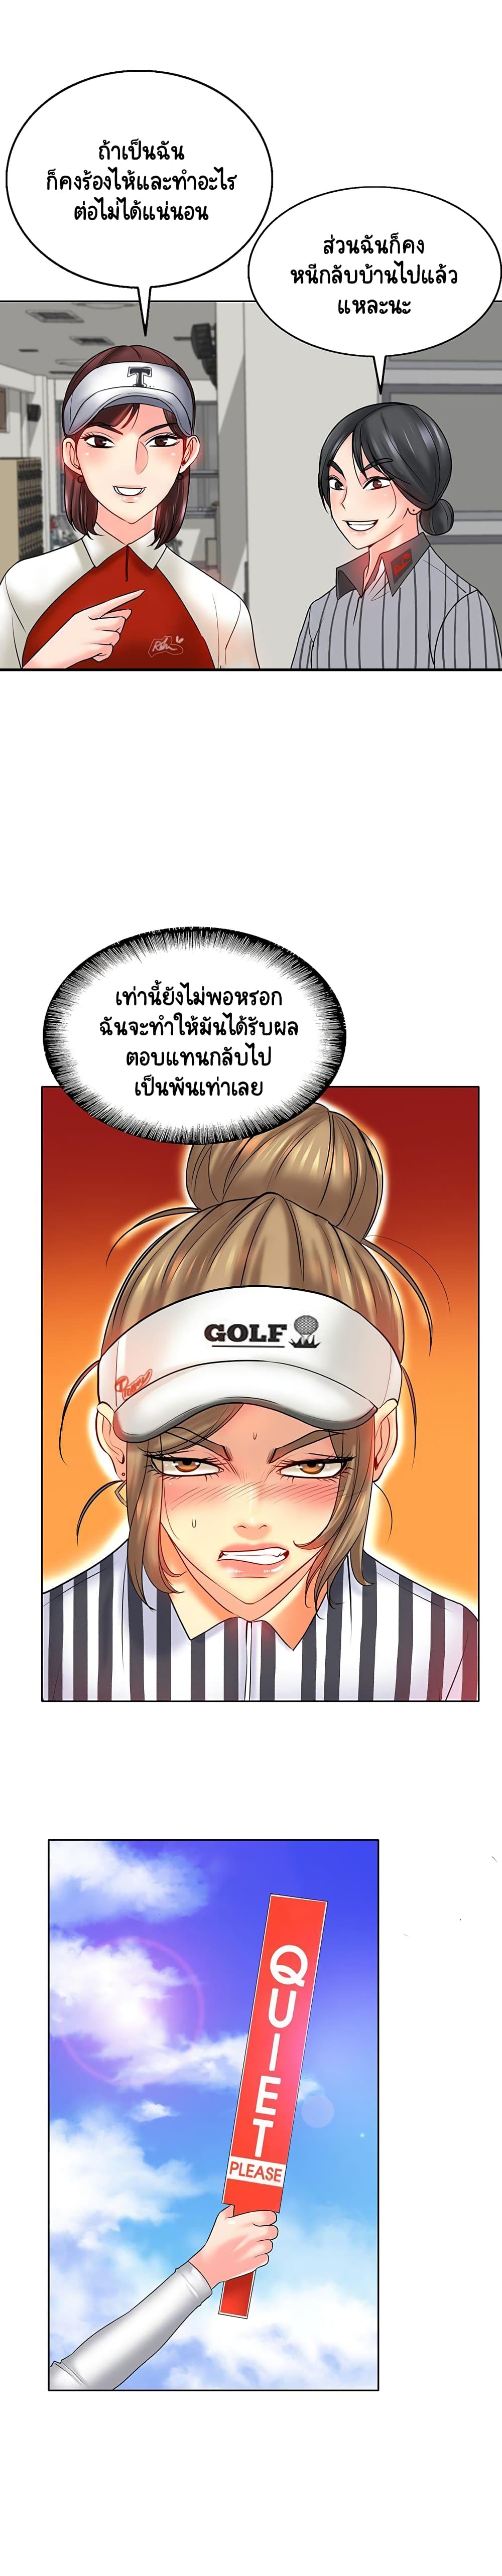 Hole In One 23 (13)